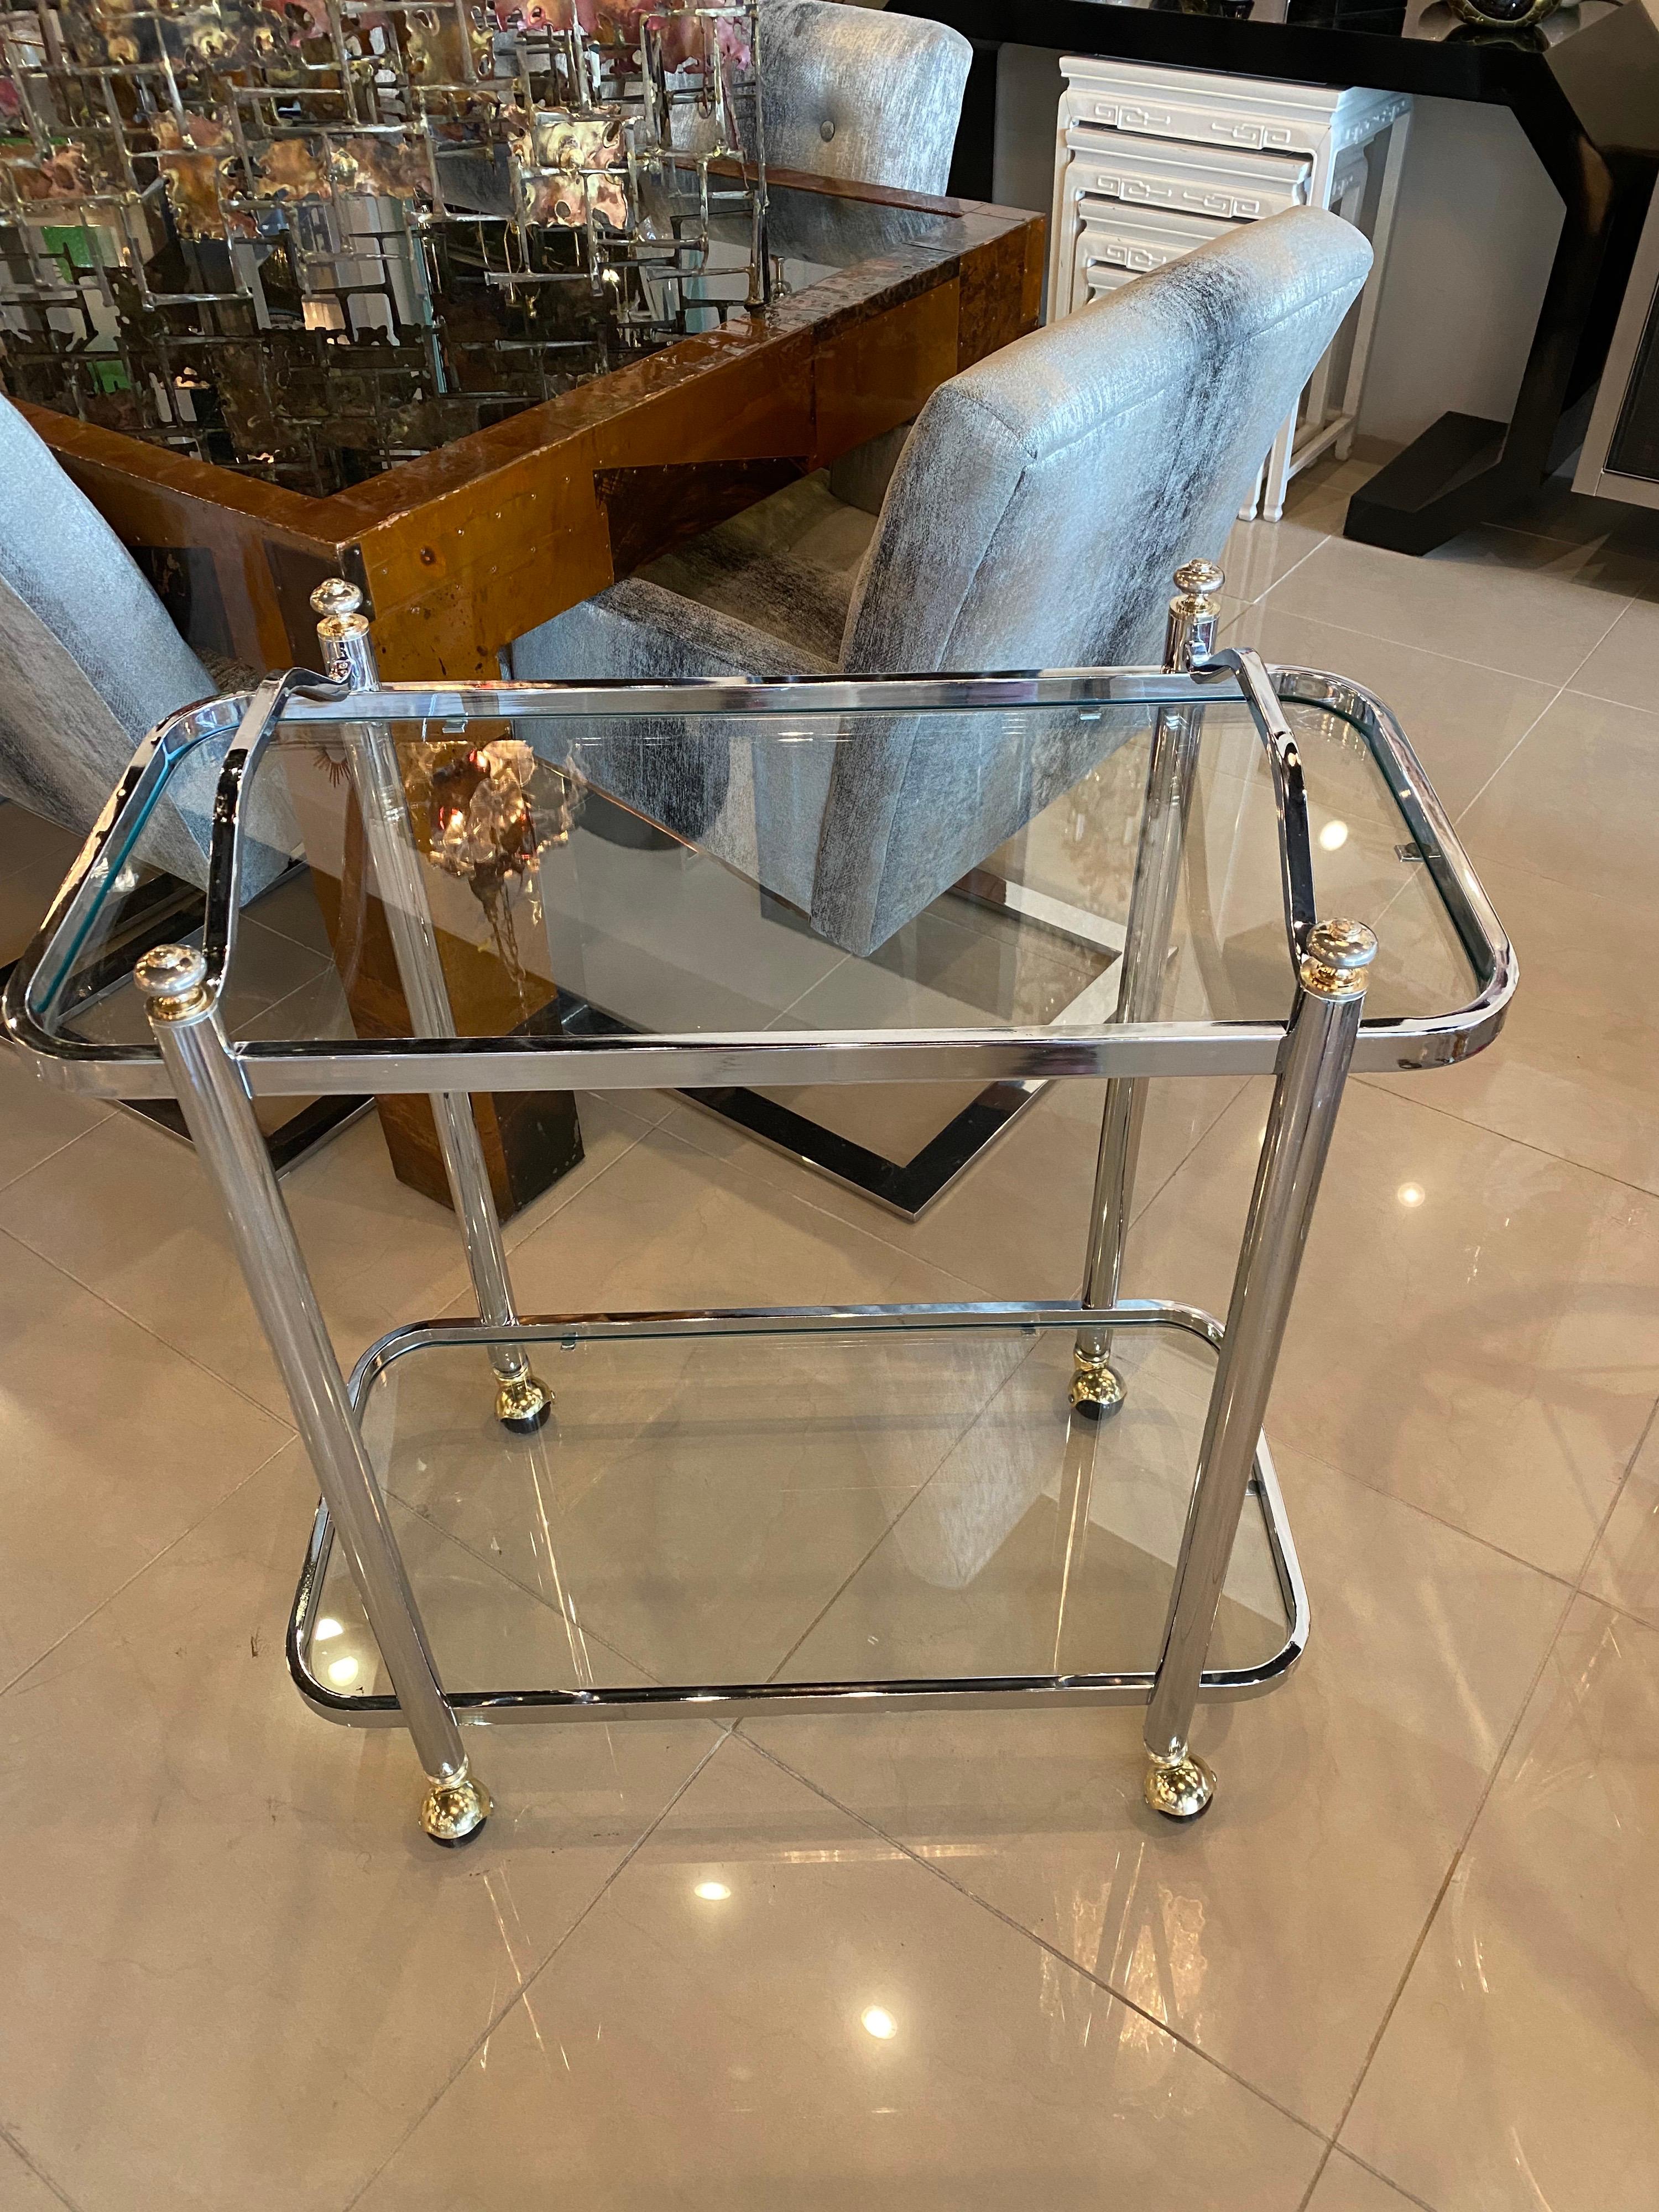 Lovely chrome and brass Barcart. Two glass shelves. The glass has been newly cut. The chrome and brass have been polished. The heavy brass castors are new as well. Dimensions: 32 H (to handles) x 16 D x 30.25 L. Height to top shelf is 29.25.